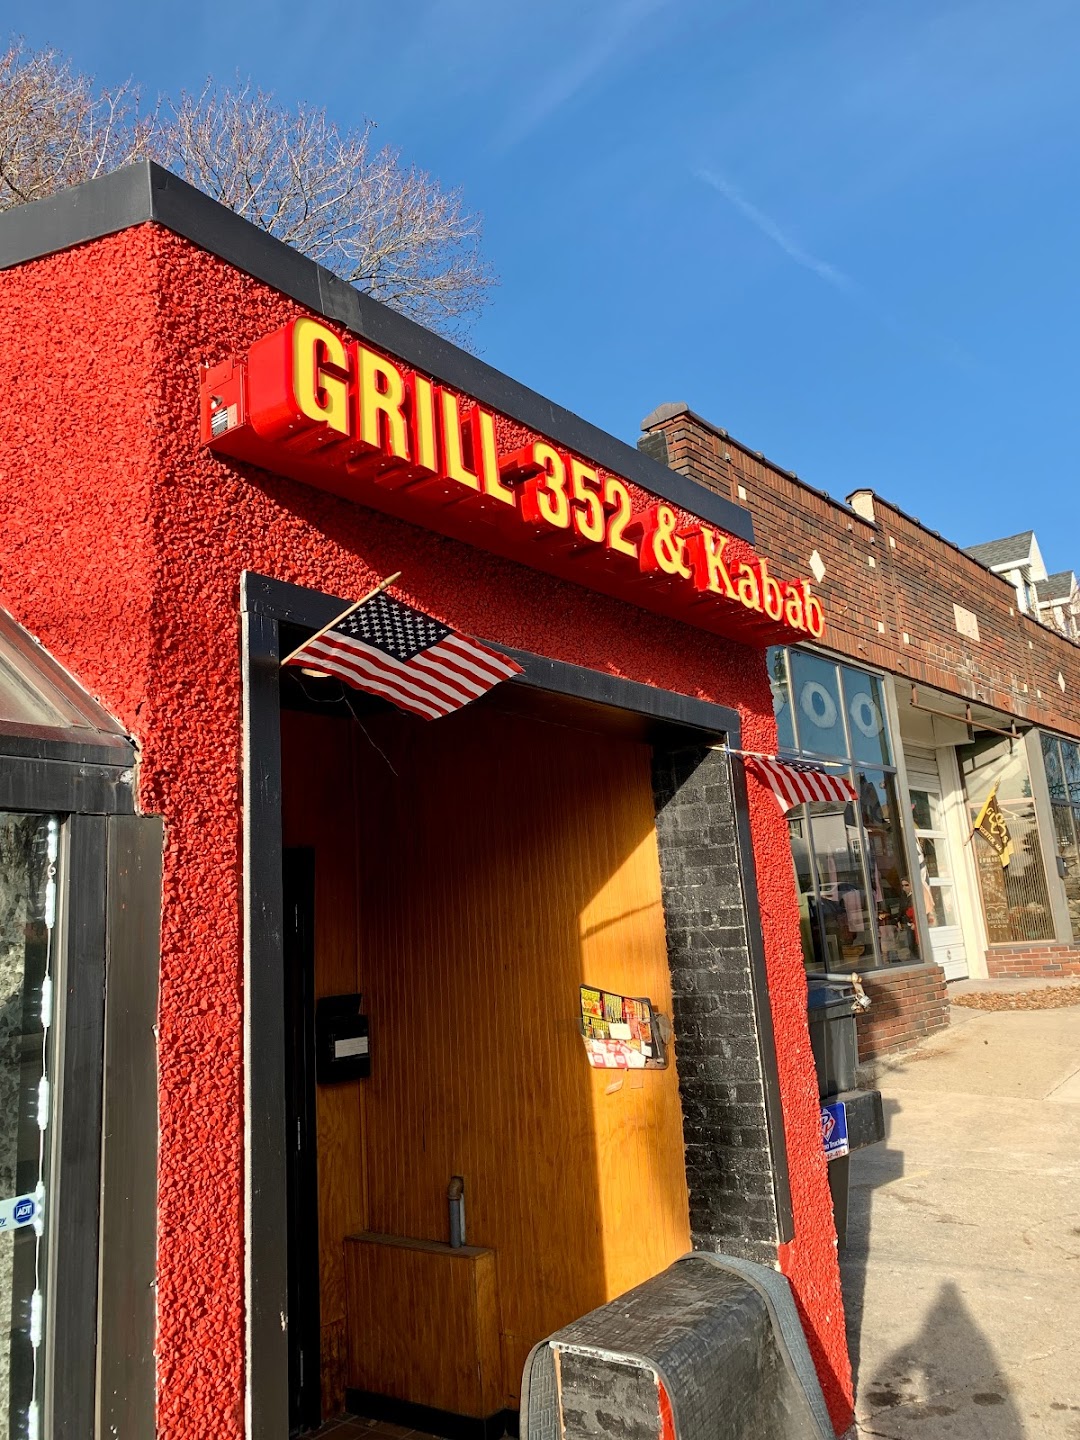 Grill 352 & kabab